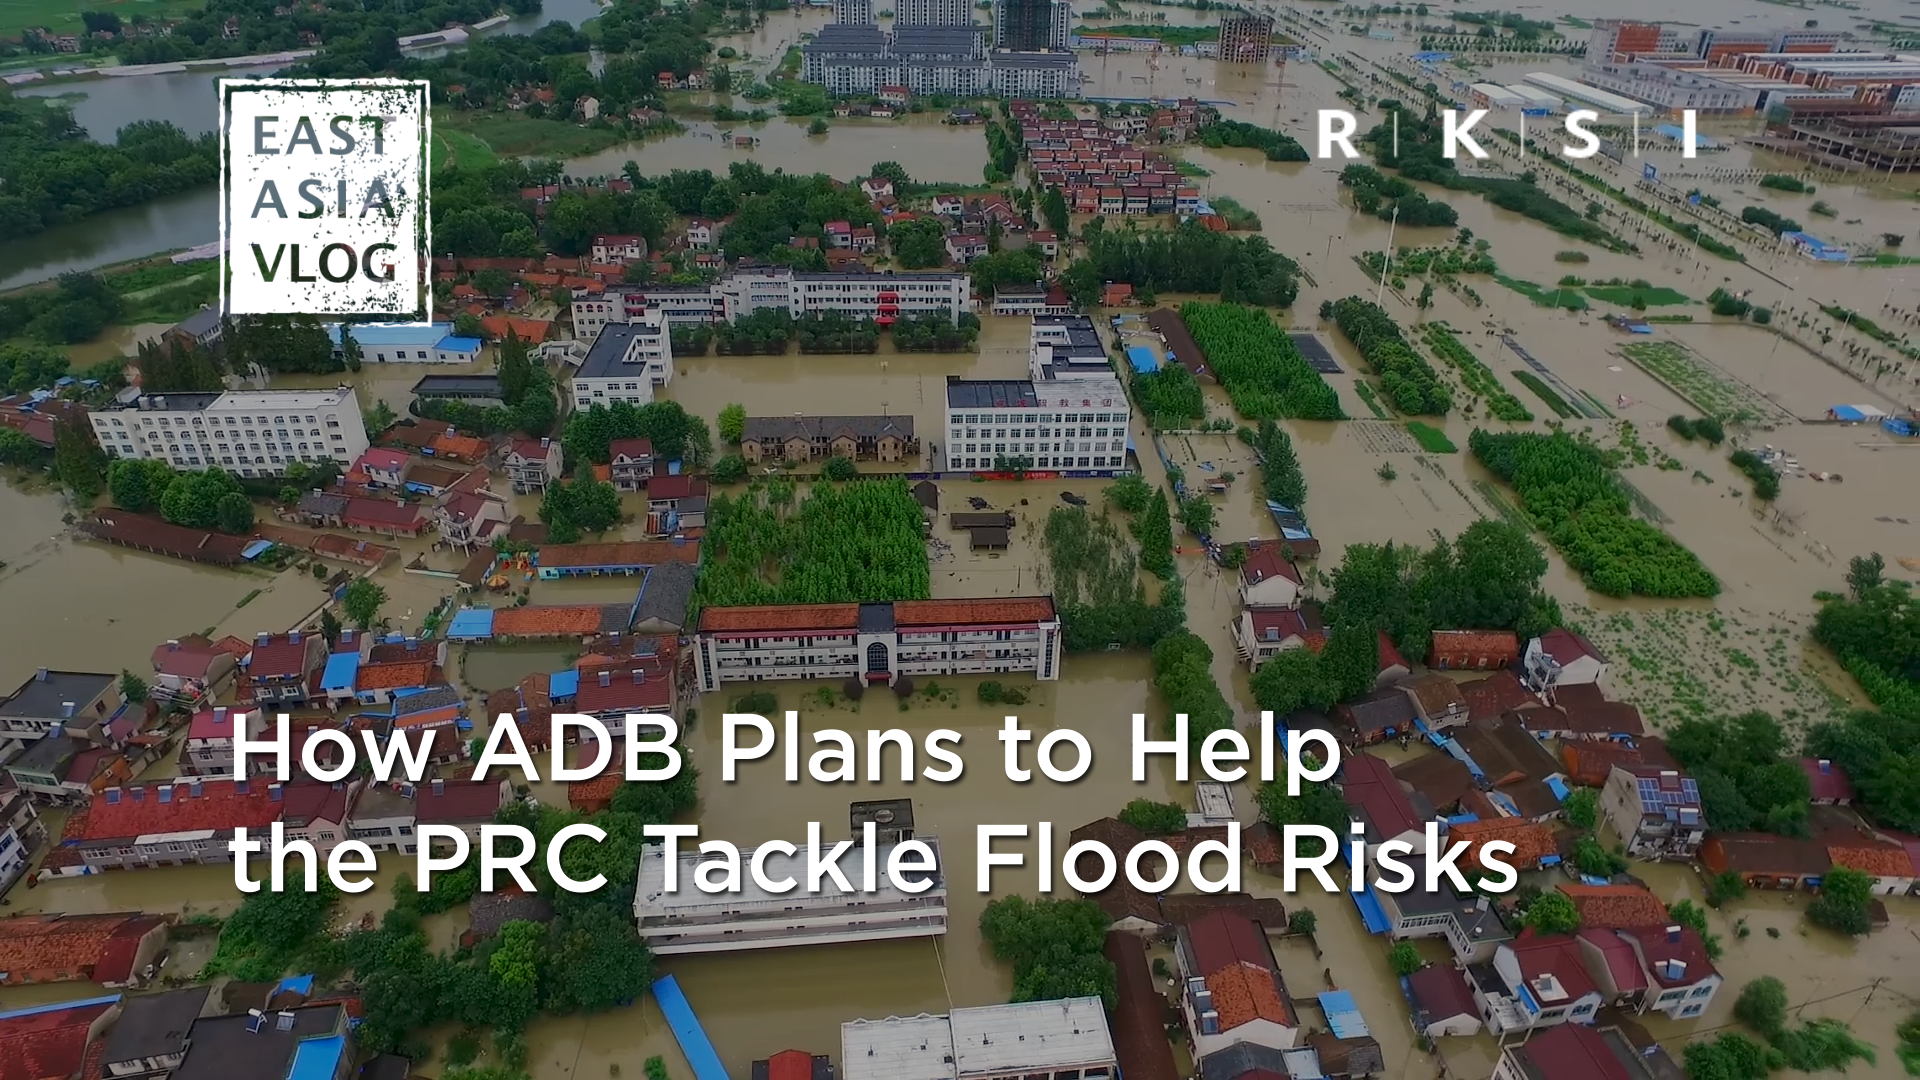 How ADB Plans to Help the PRC Tackle Flood Risks